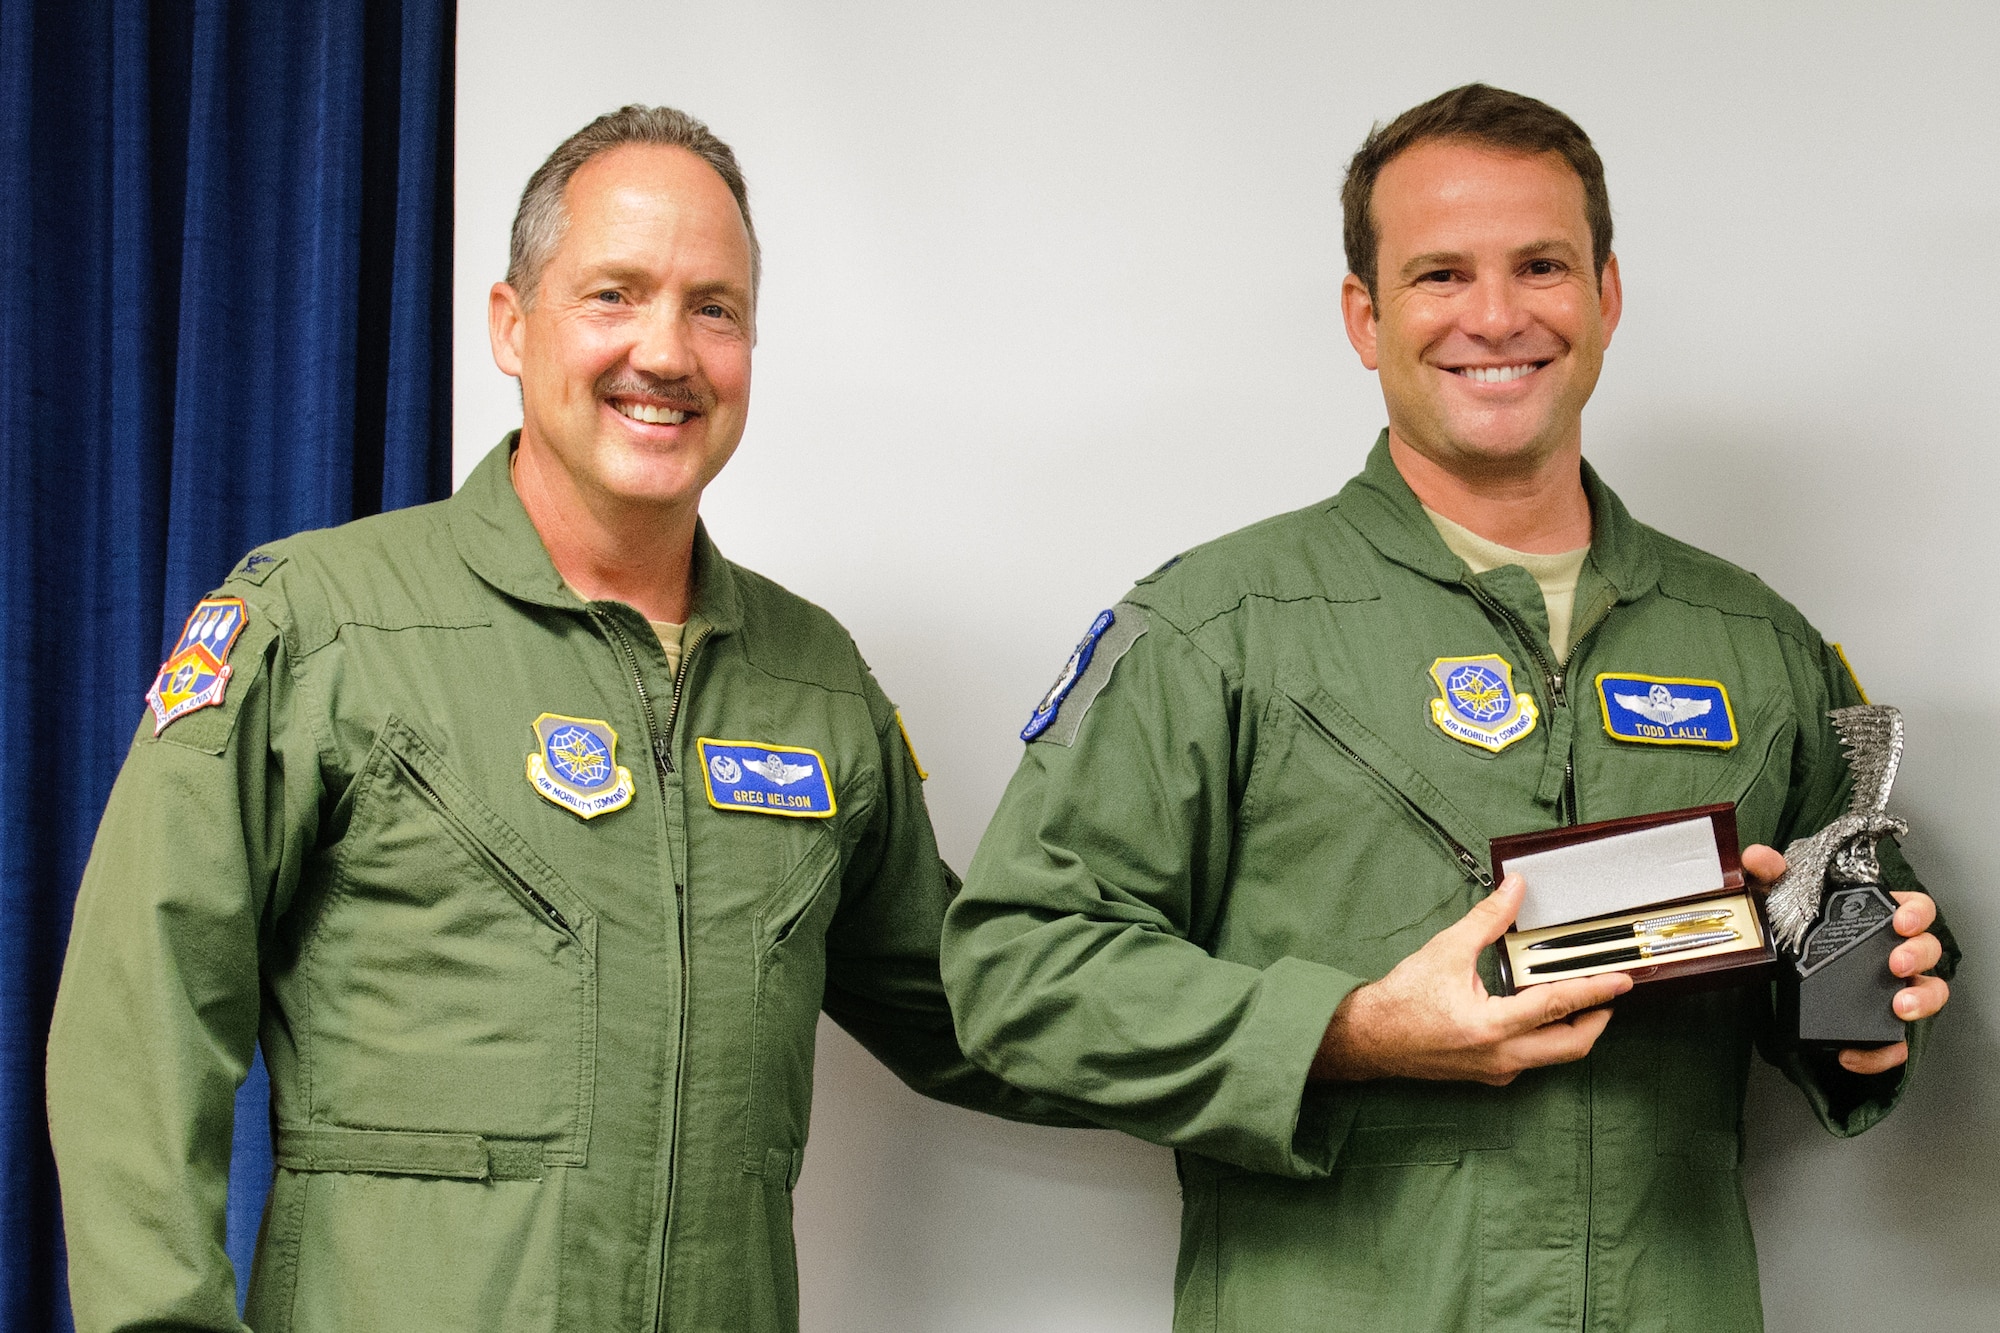 Col. Greg Nelson, commander of the 123rd Airlift Wing, presents Lt. Col. Todd Lally with the 2011 Air National Guard Outstanding Individual for Flight Safety Award during a ceremony at the Kentucky Air National Guard Base in Louisville, Ky., on May 19, 2012. Lally, chief of the wing safety office, earned the honor for his exceptional dedication to the safety community, according to the National Guard Bureau. (U.S. Air Force photo by Senior Airman Maxwell Rechel)